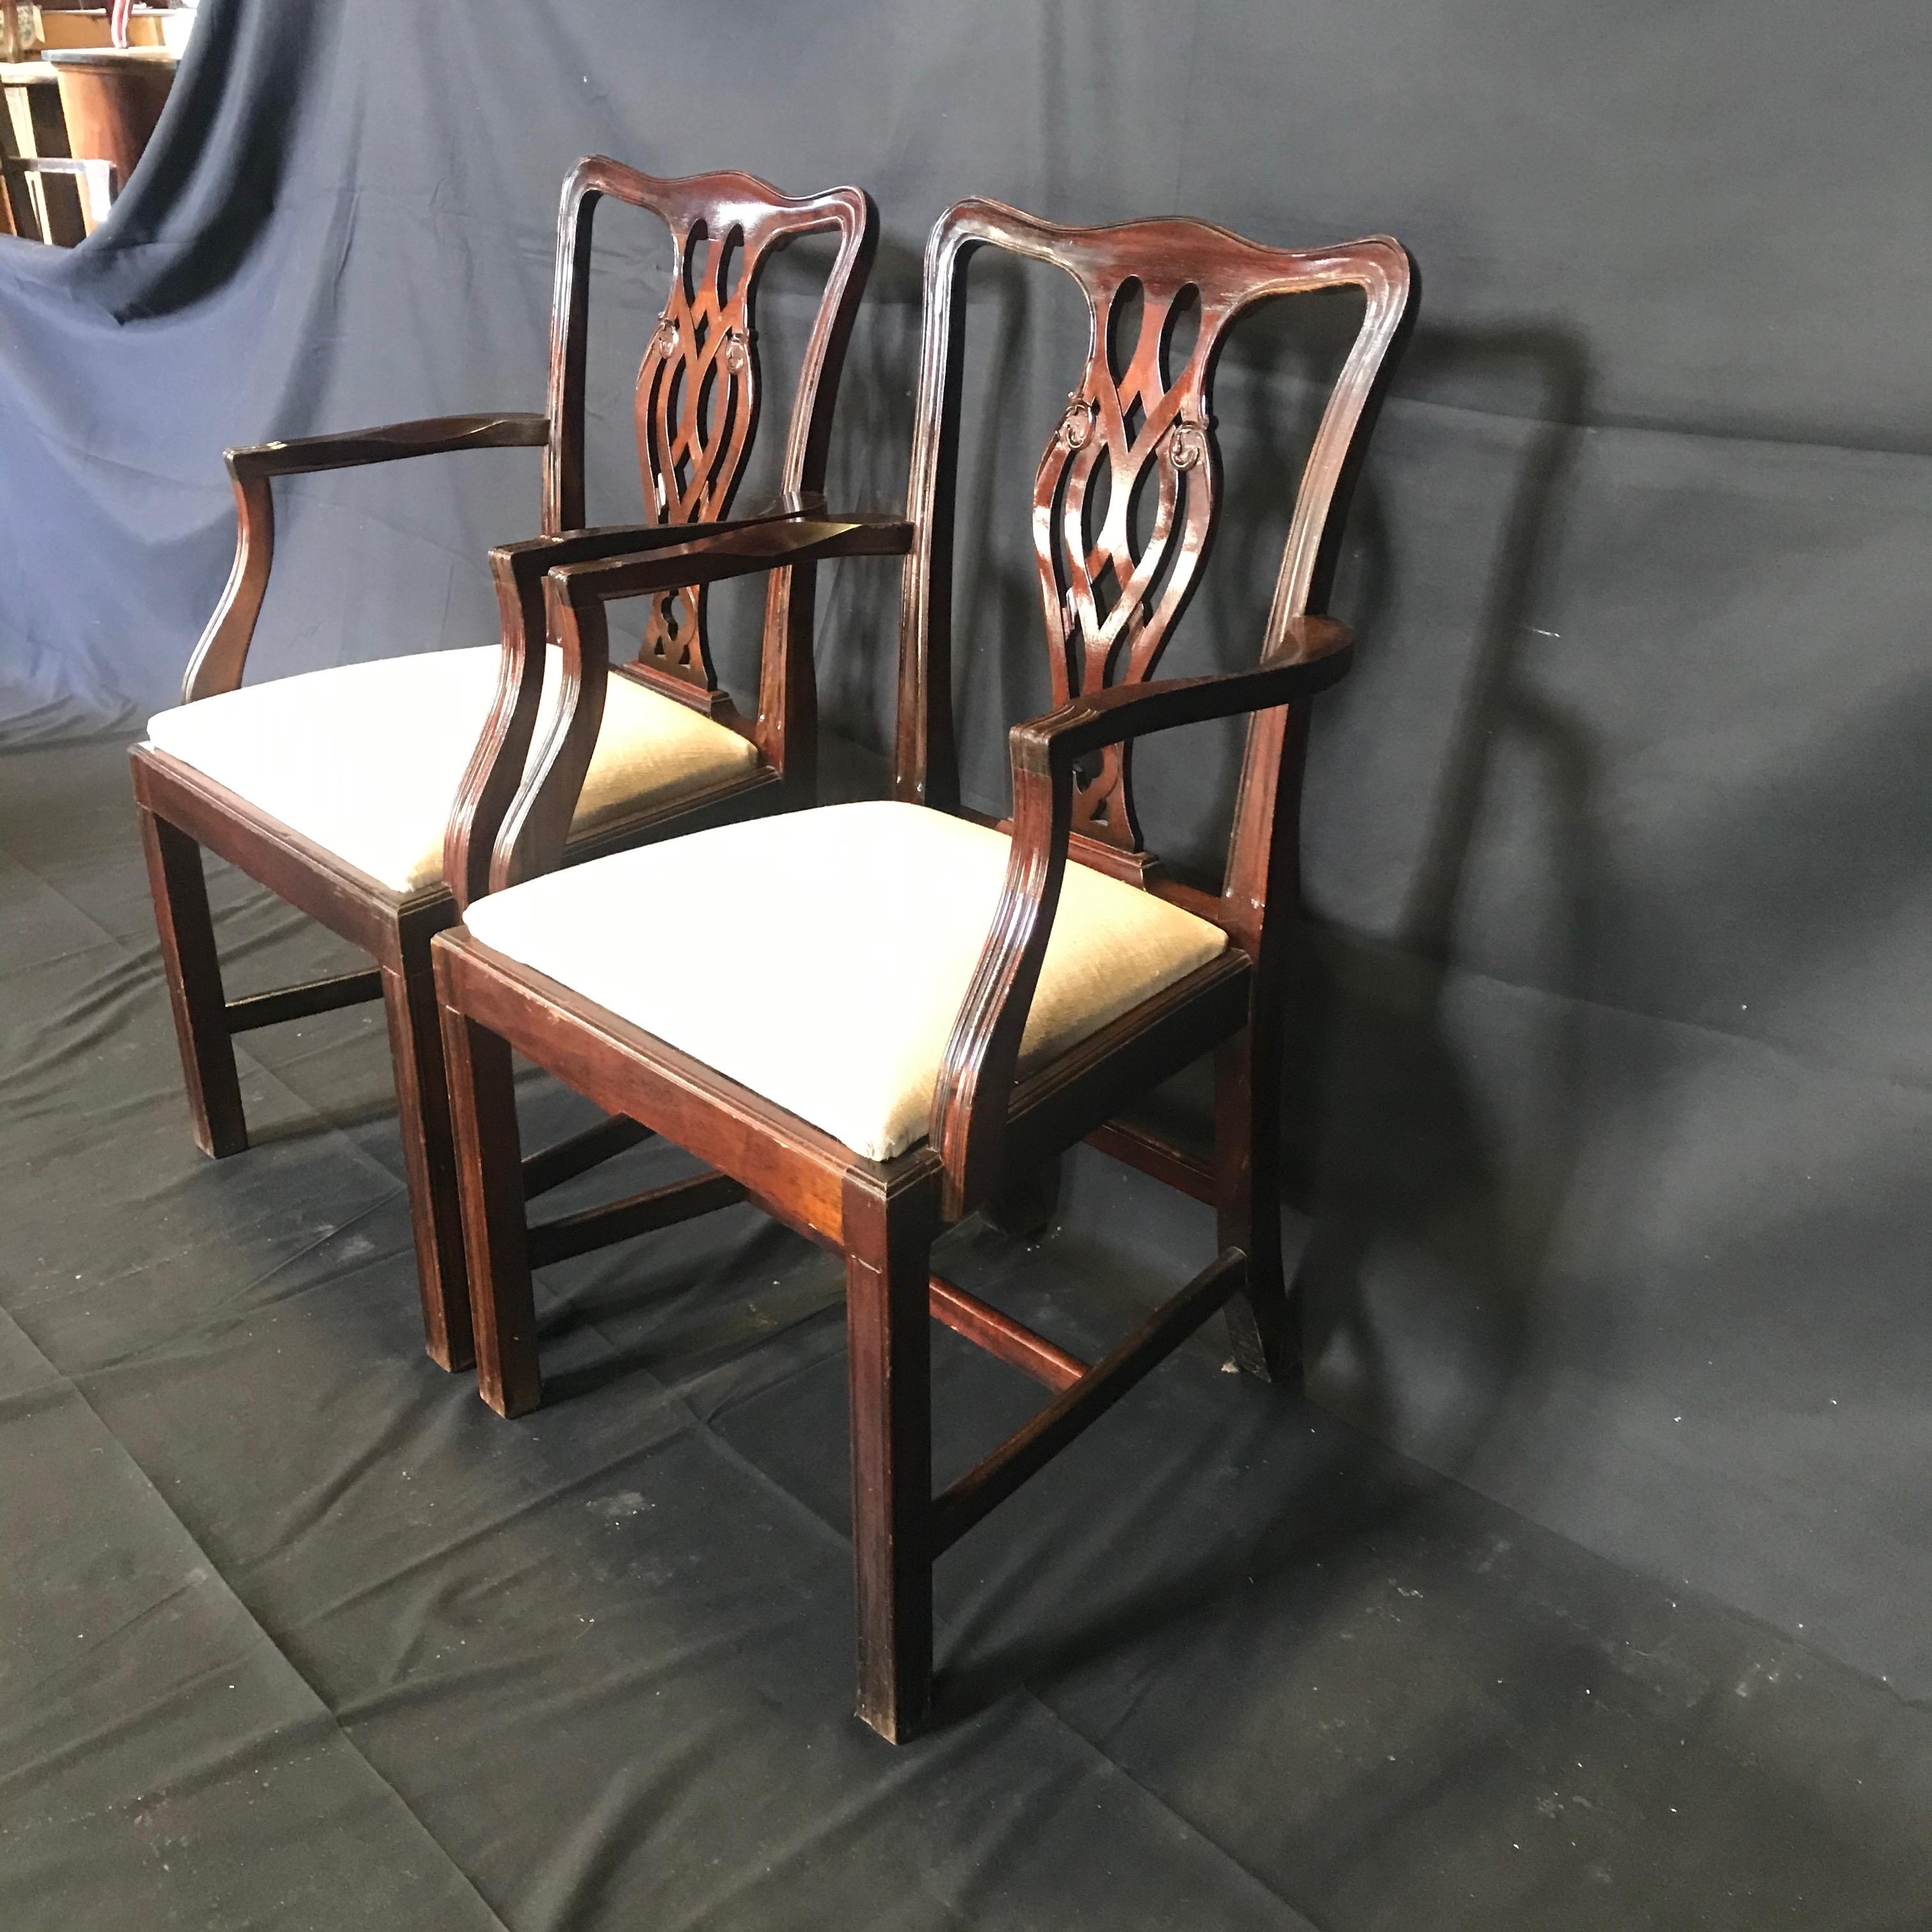 A set of six very handsome fine English Chippendale style dining chairs with two armchairs and four side chairs. Each chair is beautiful mahogany with exceptional color and rich patina. There is some color variation due to light exposure over the